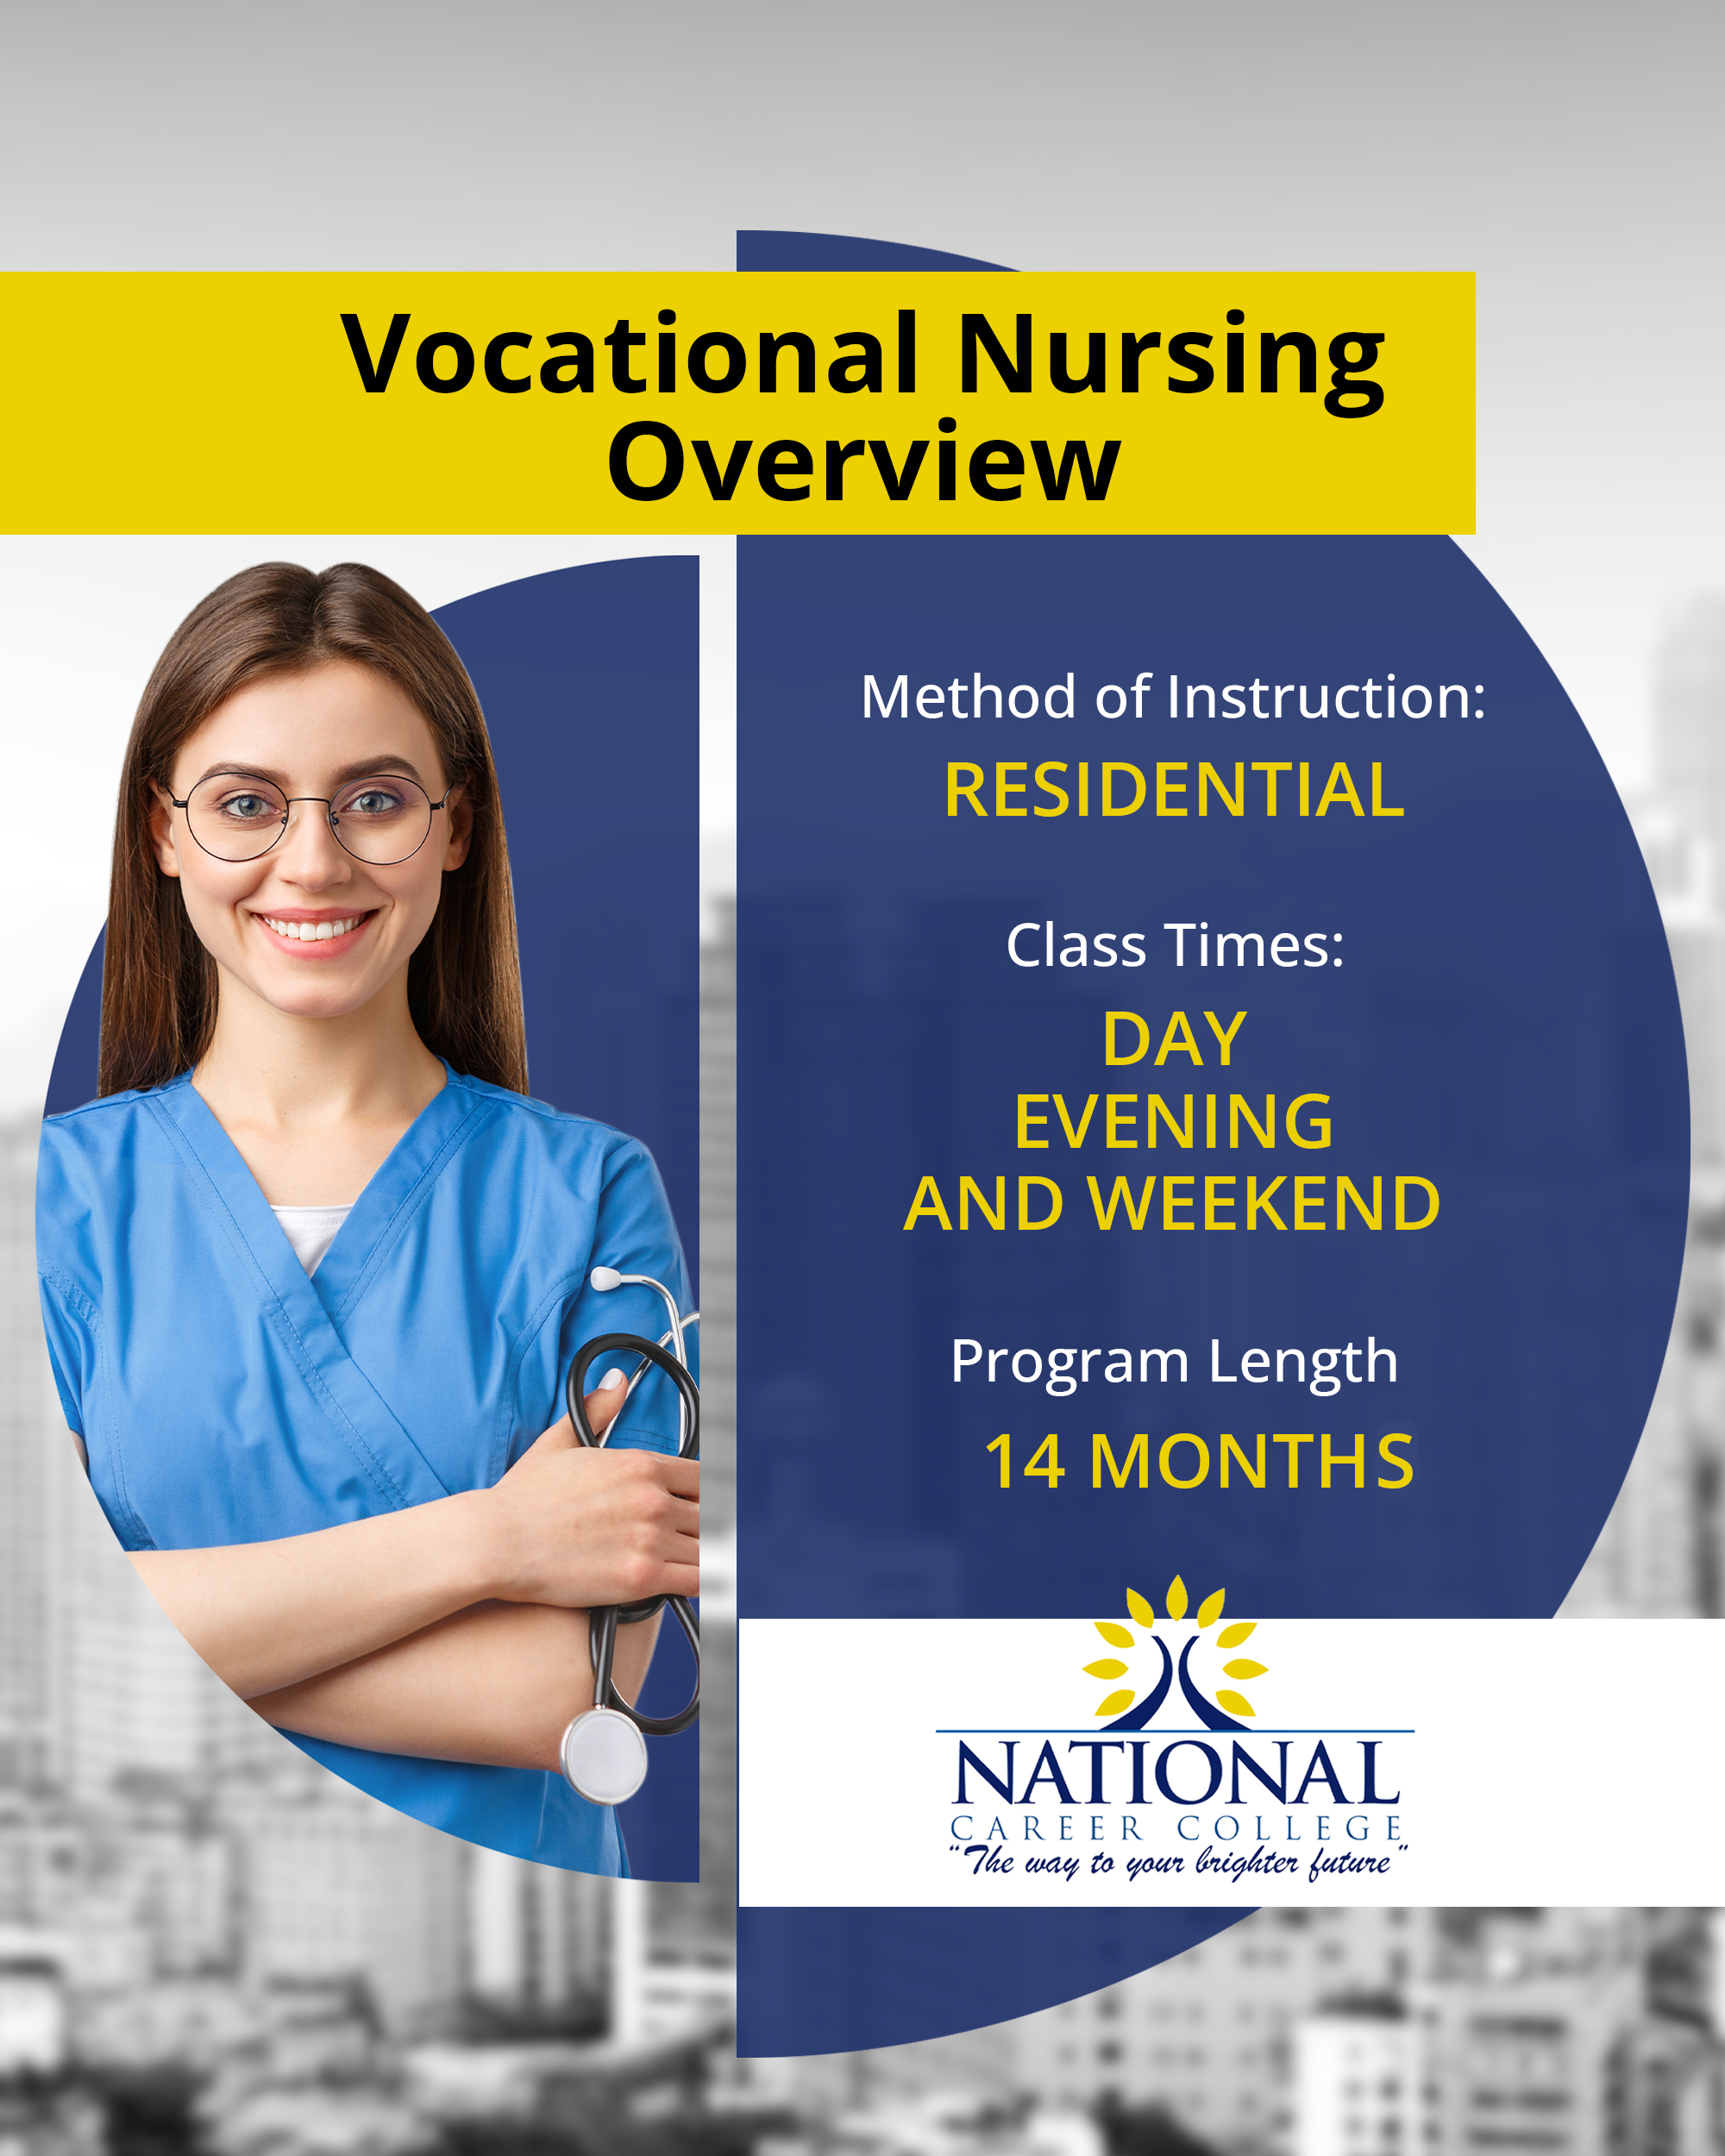 a-day-in-the-life-of-a-vocational-nurse